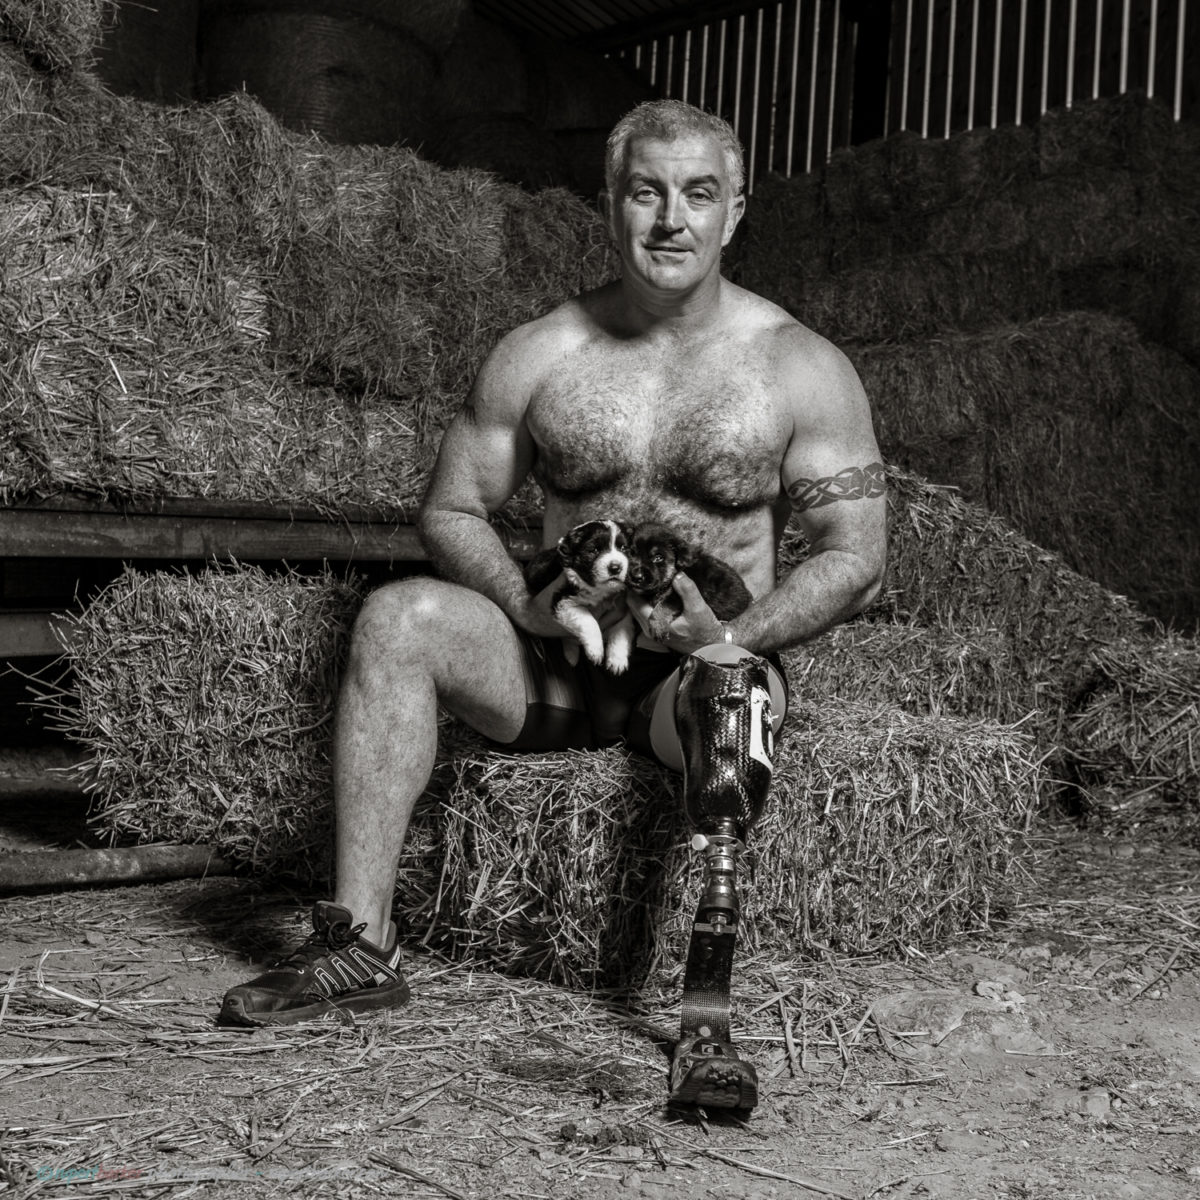 Topless Male Portrait with rescue puppies Black and White Calendar shoot